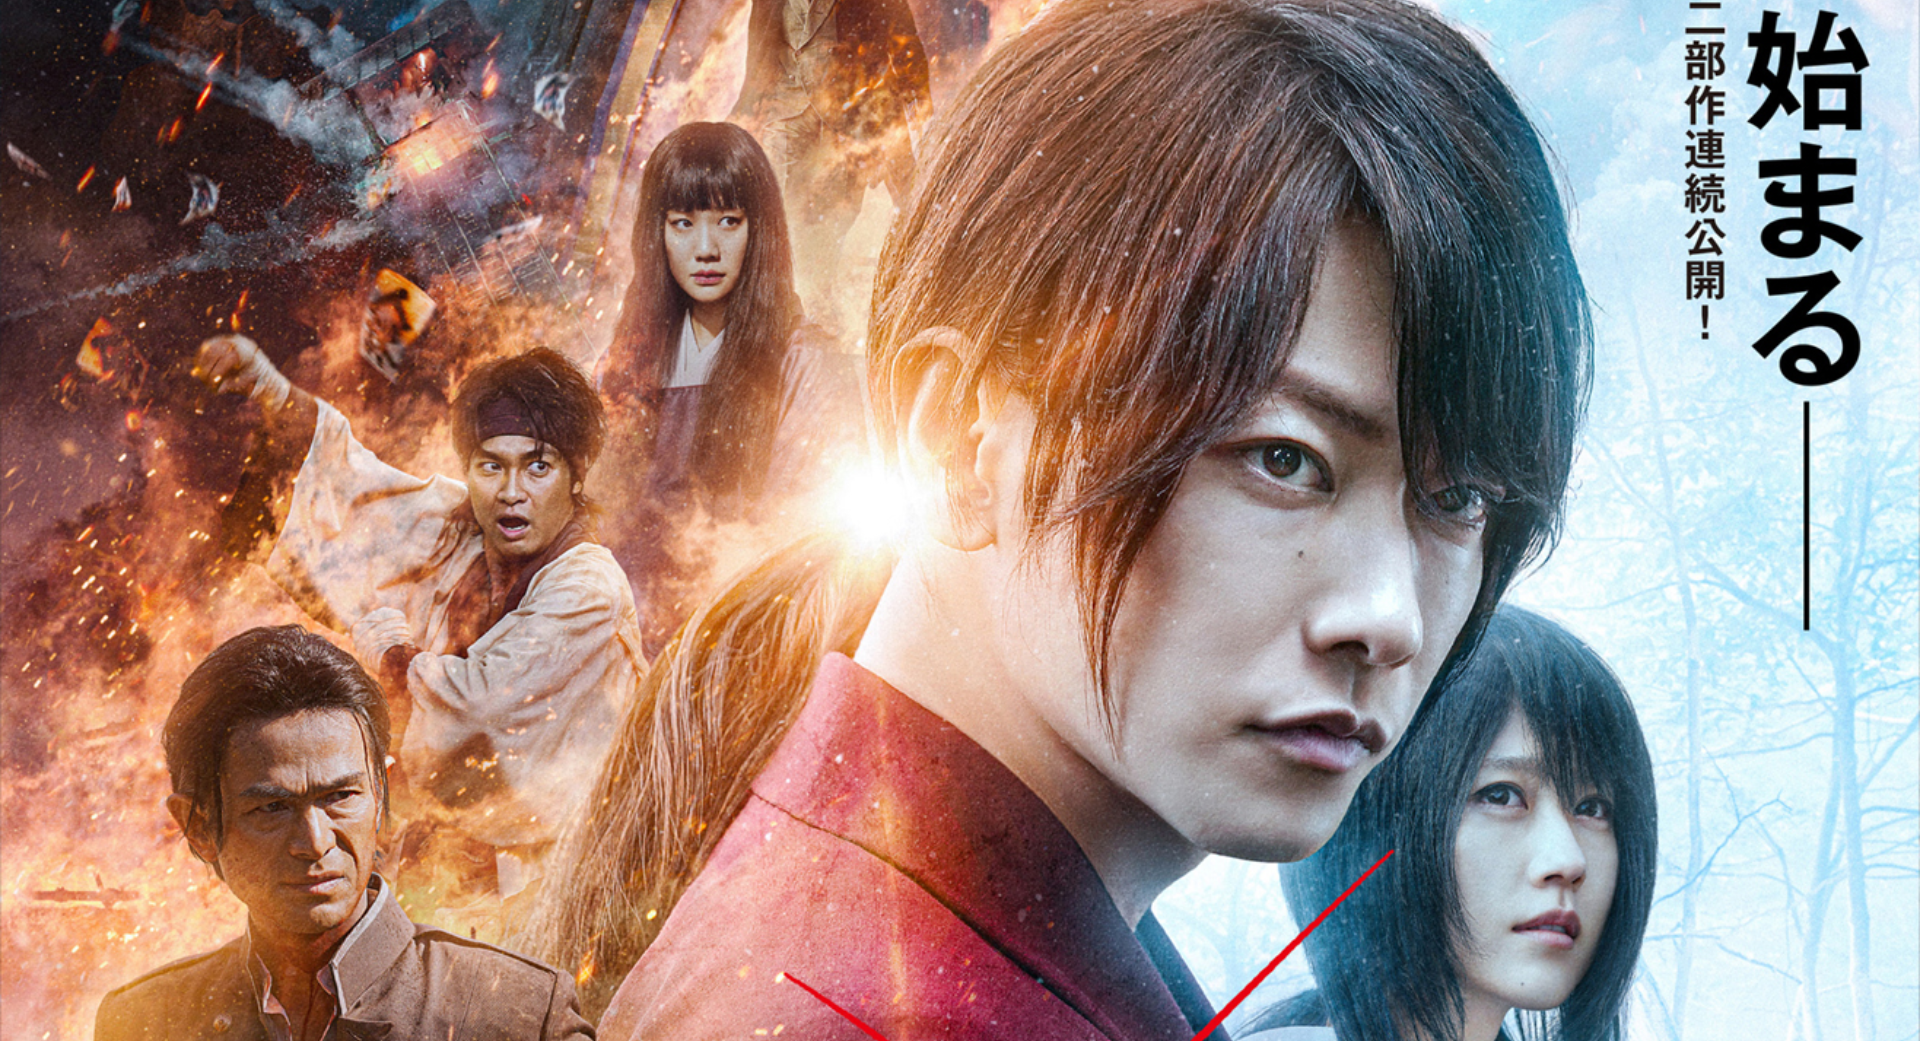 Rurouni Kenshin: The Final/ The Beginning Ranks 1 and 2 at Japan's Box  Office